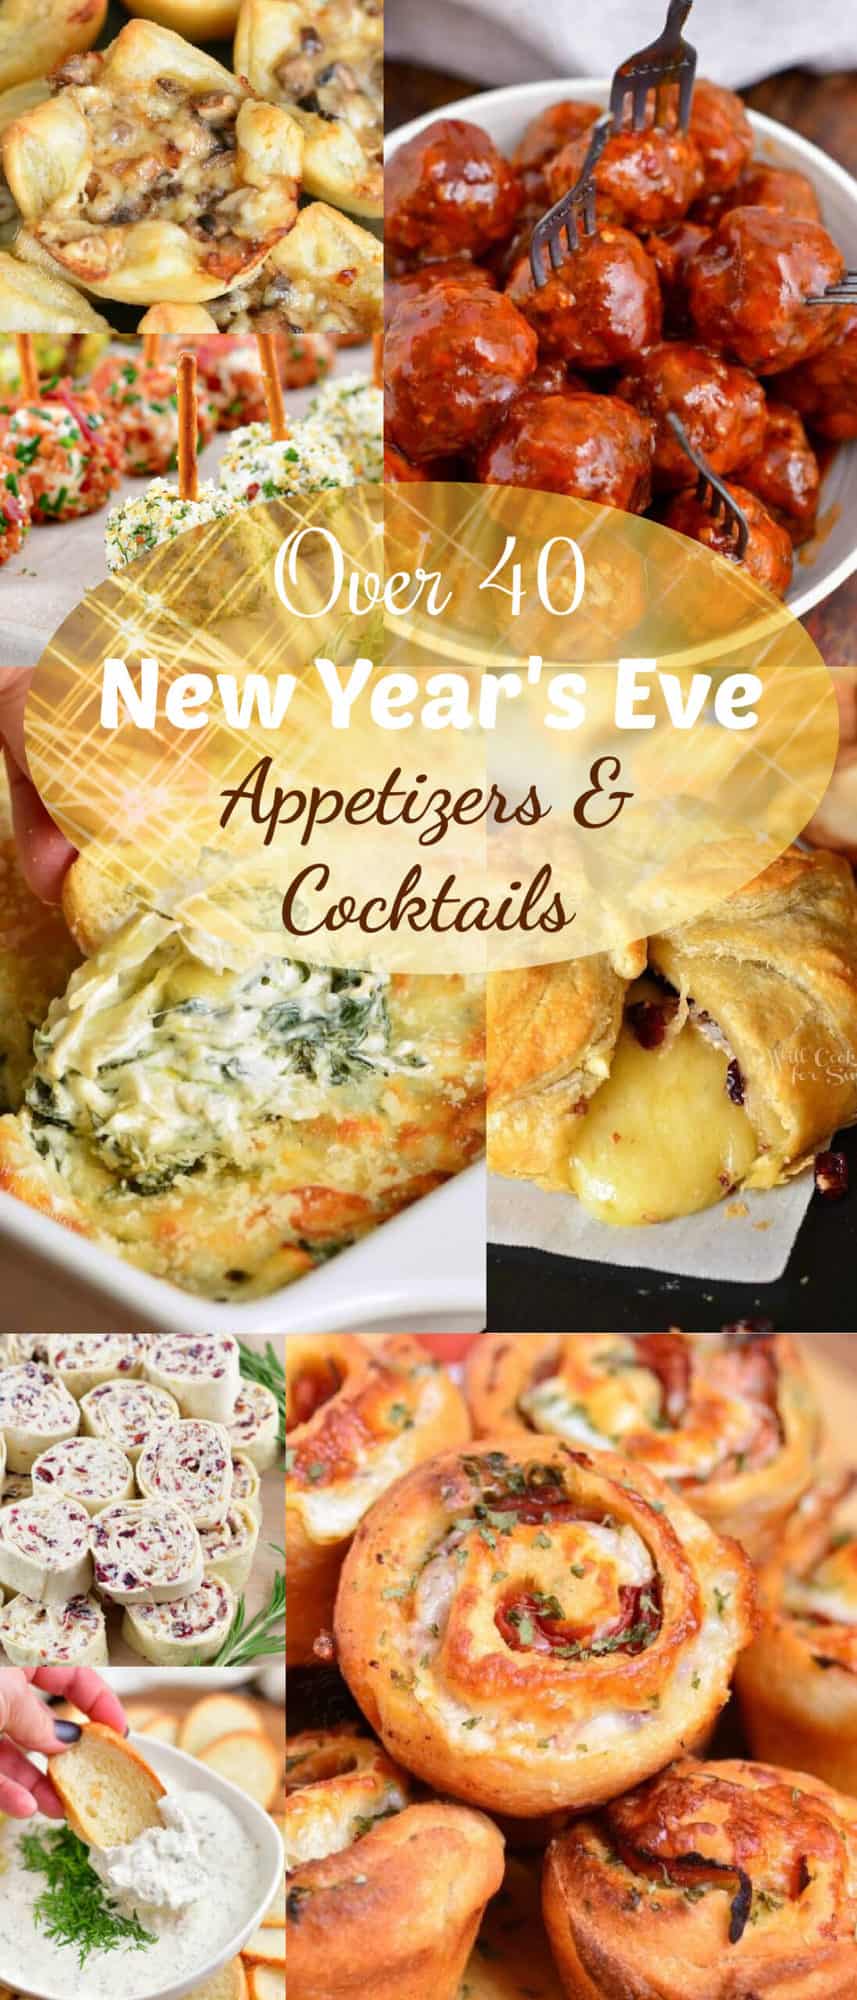 several new year's eve appetizers in a collage with title